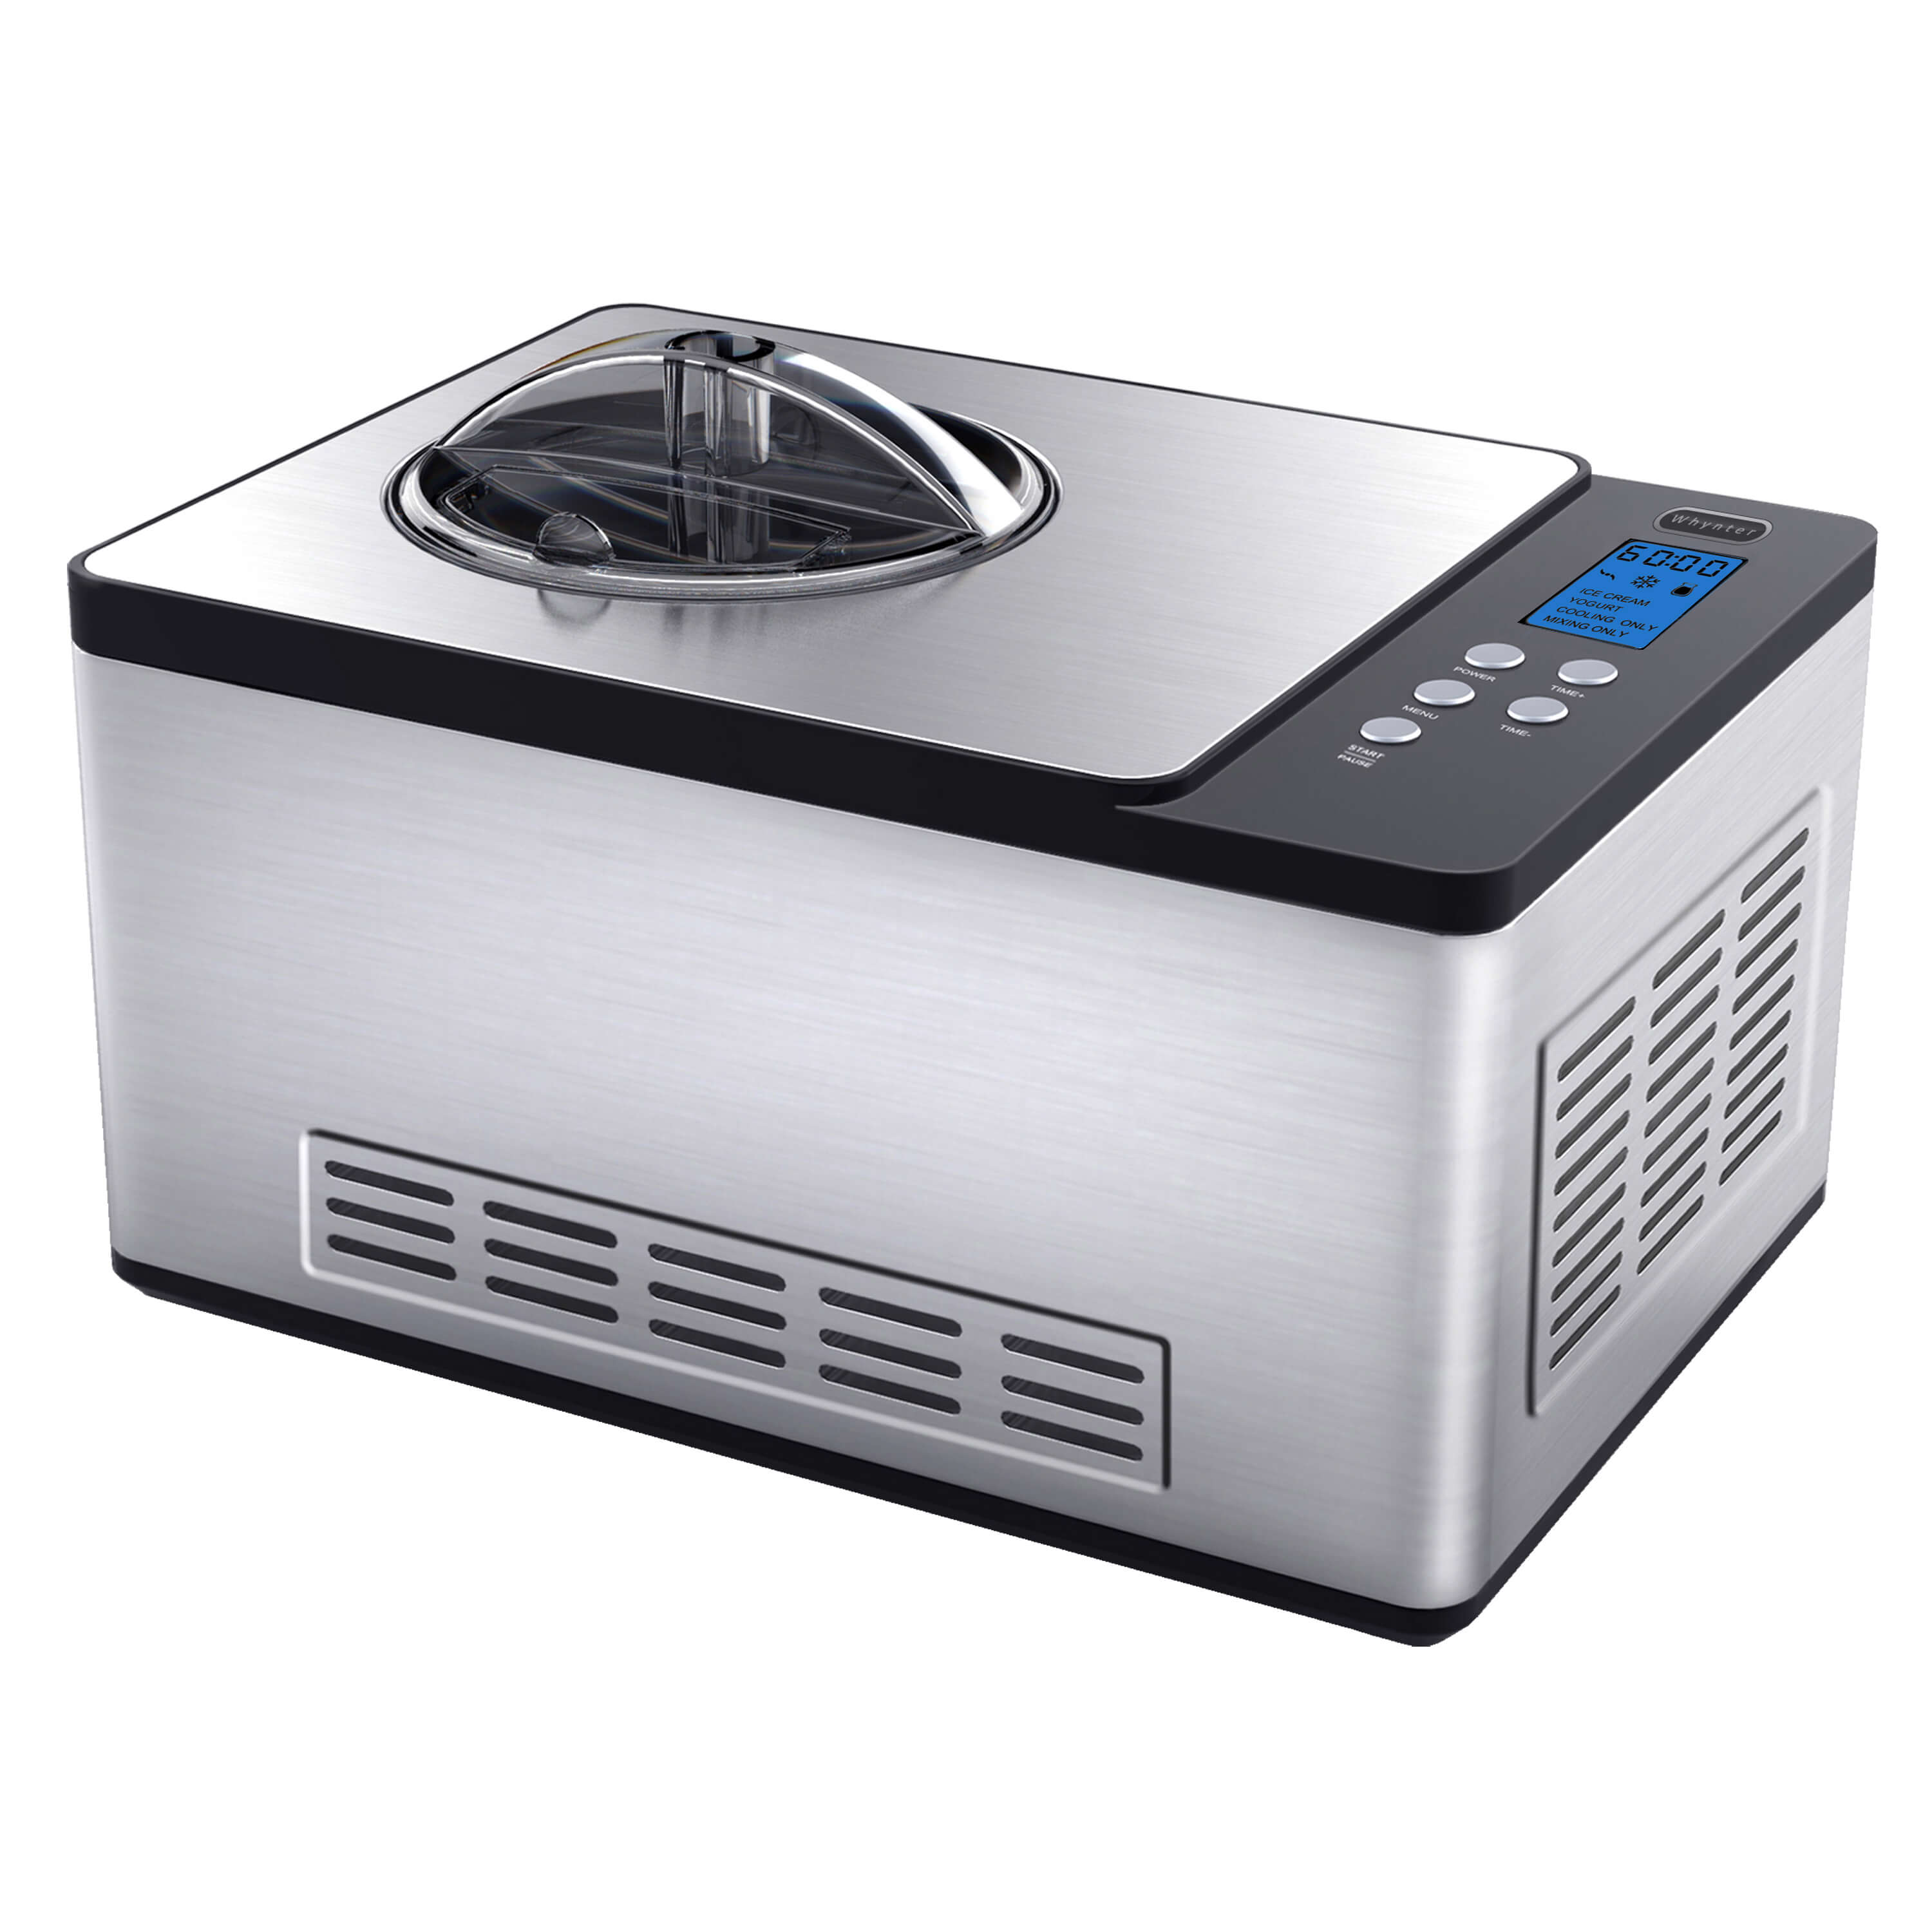 Ivation Automatic Ice Cream Maker Machine with Built-in Compressor - Stainless Steel